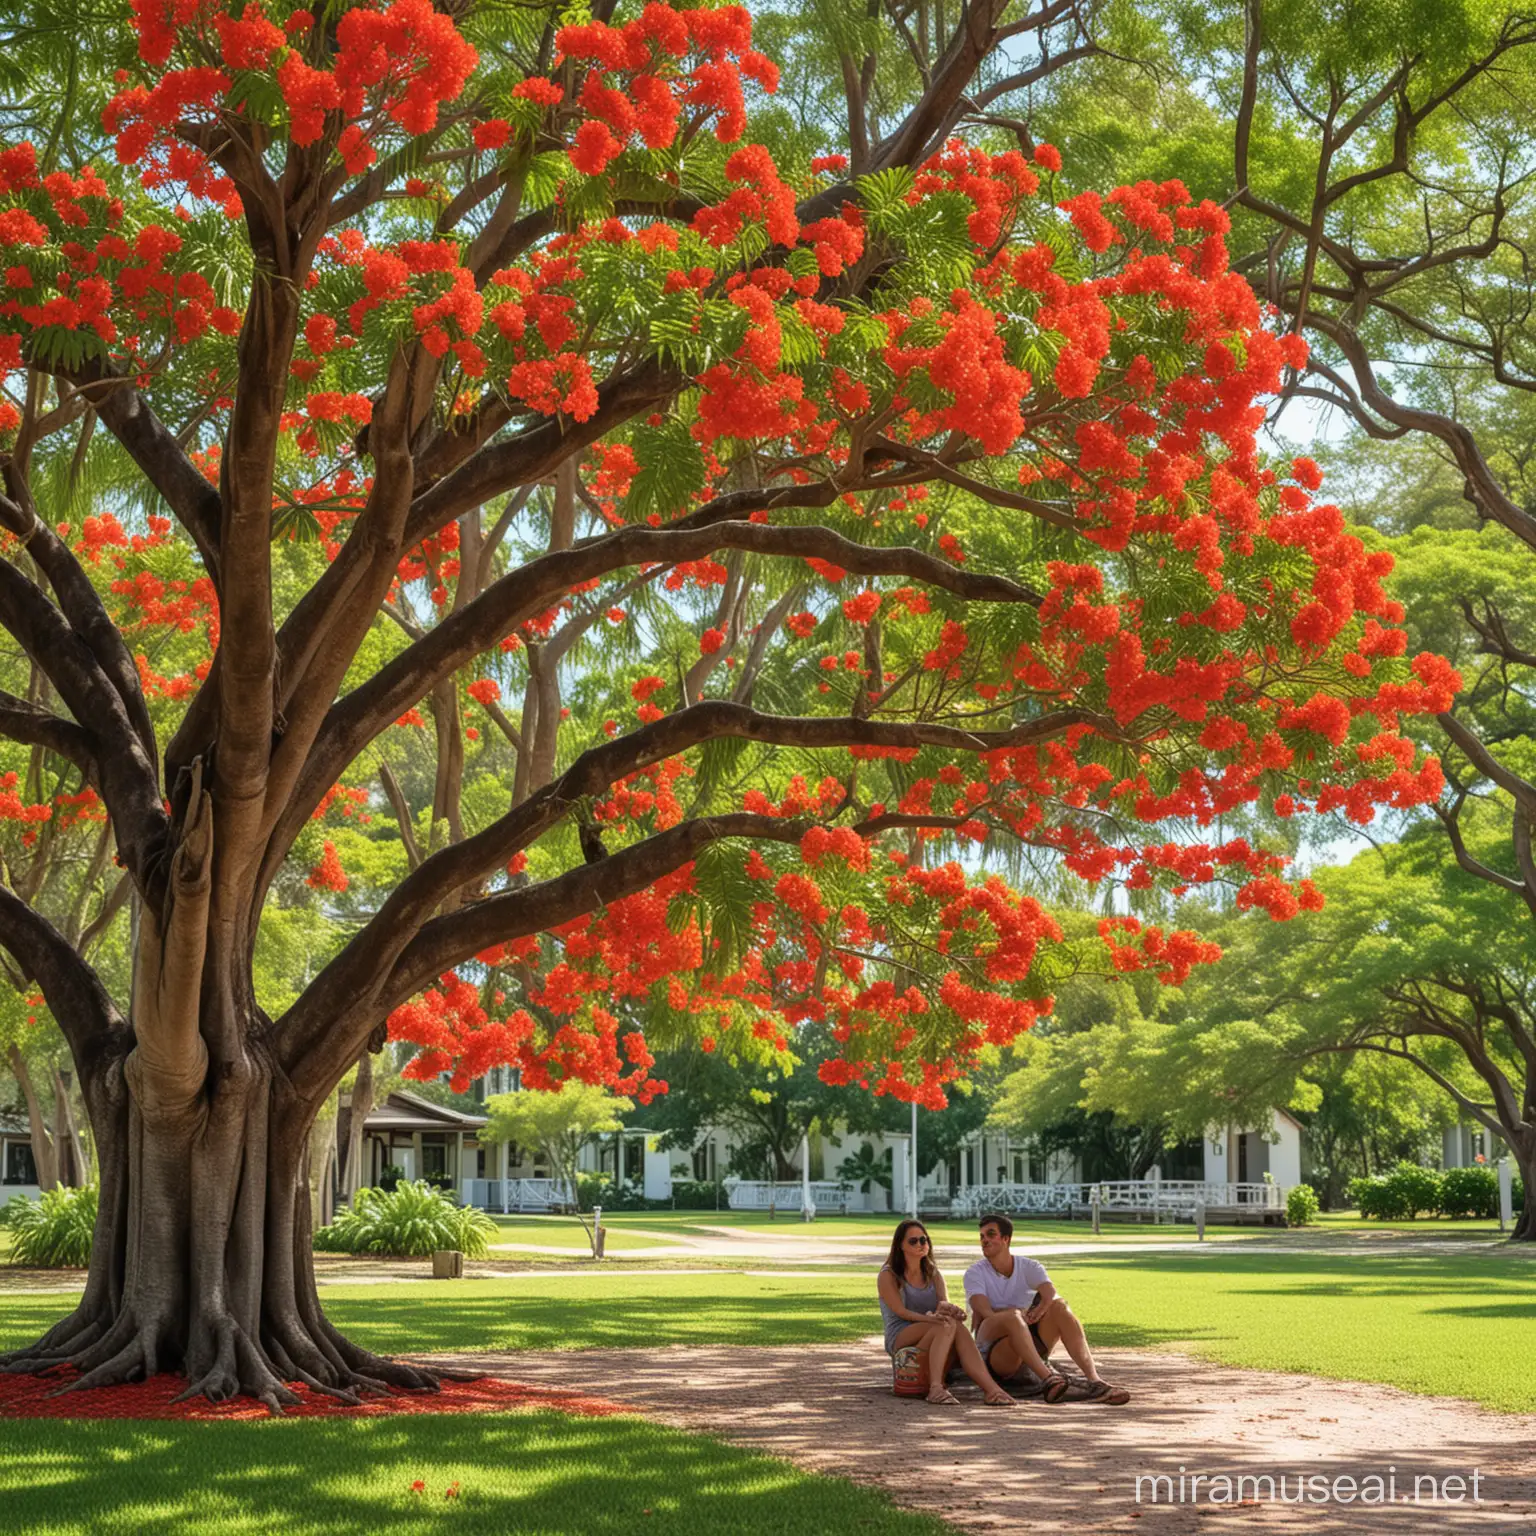 Romantic Couple Relaxing under Royal Poinciana Tree in Quaint Village Setting